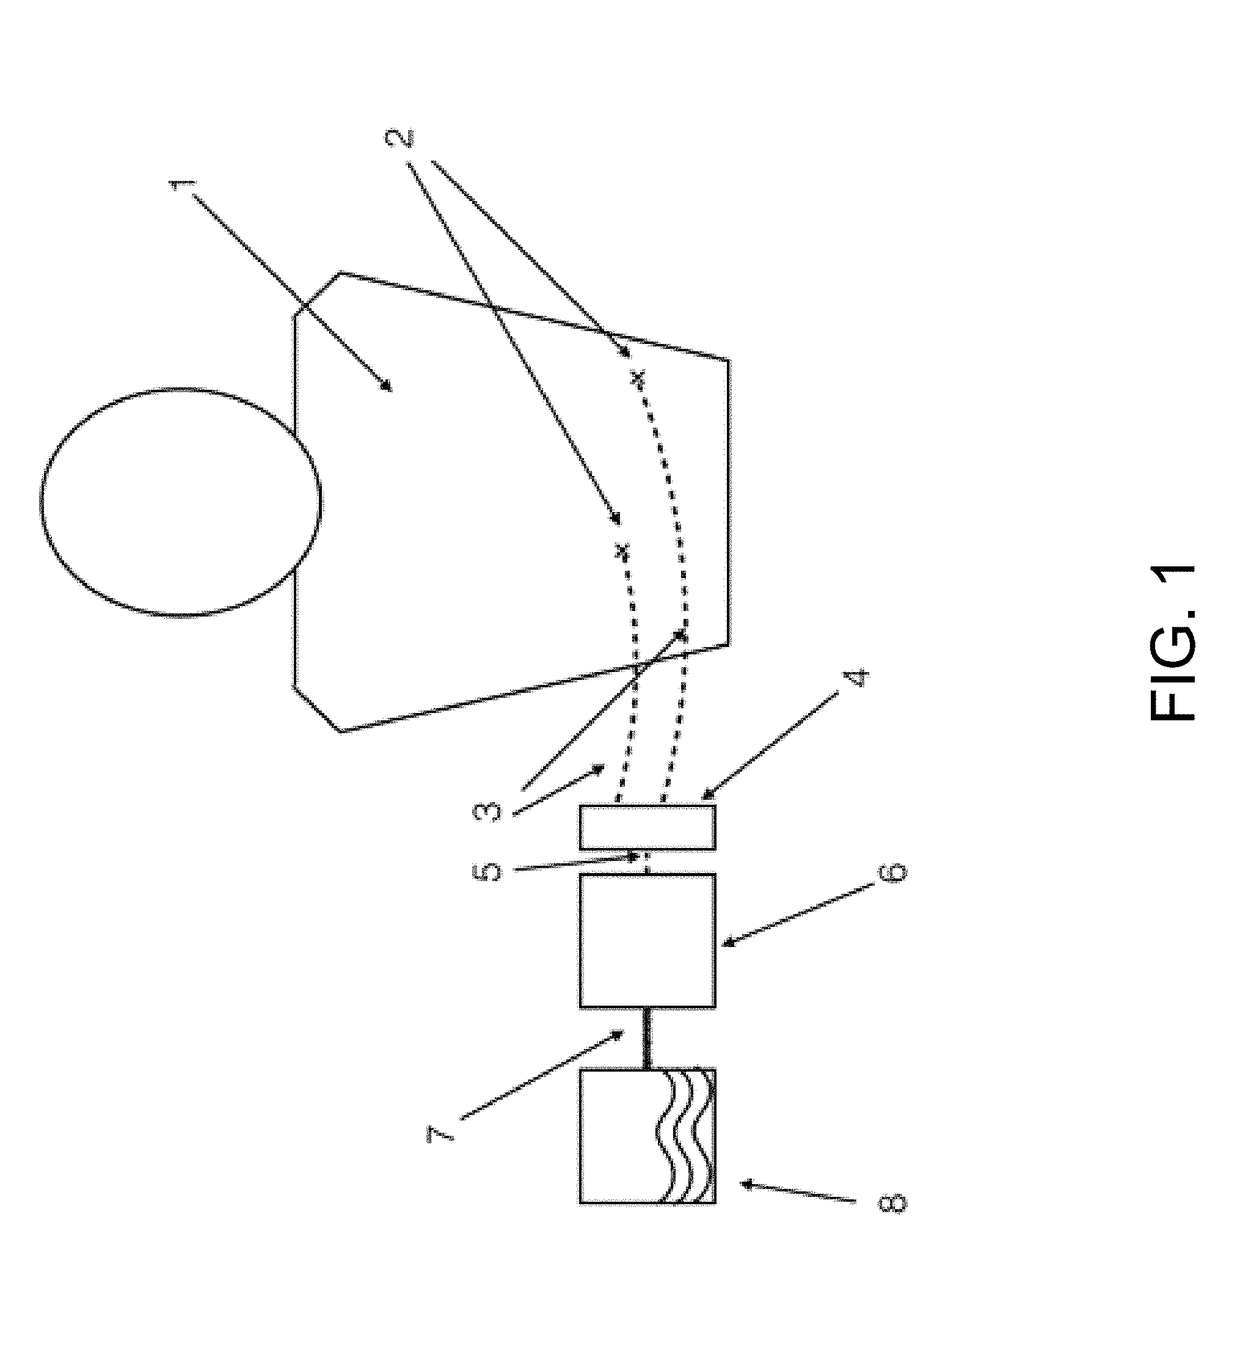 Portable device with disposable reservoir for collection of internal fluid after surgery